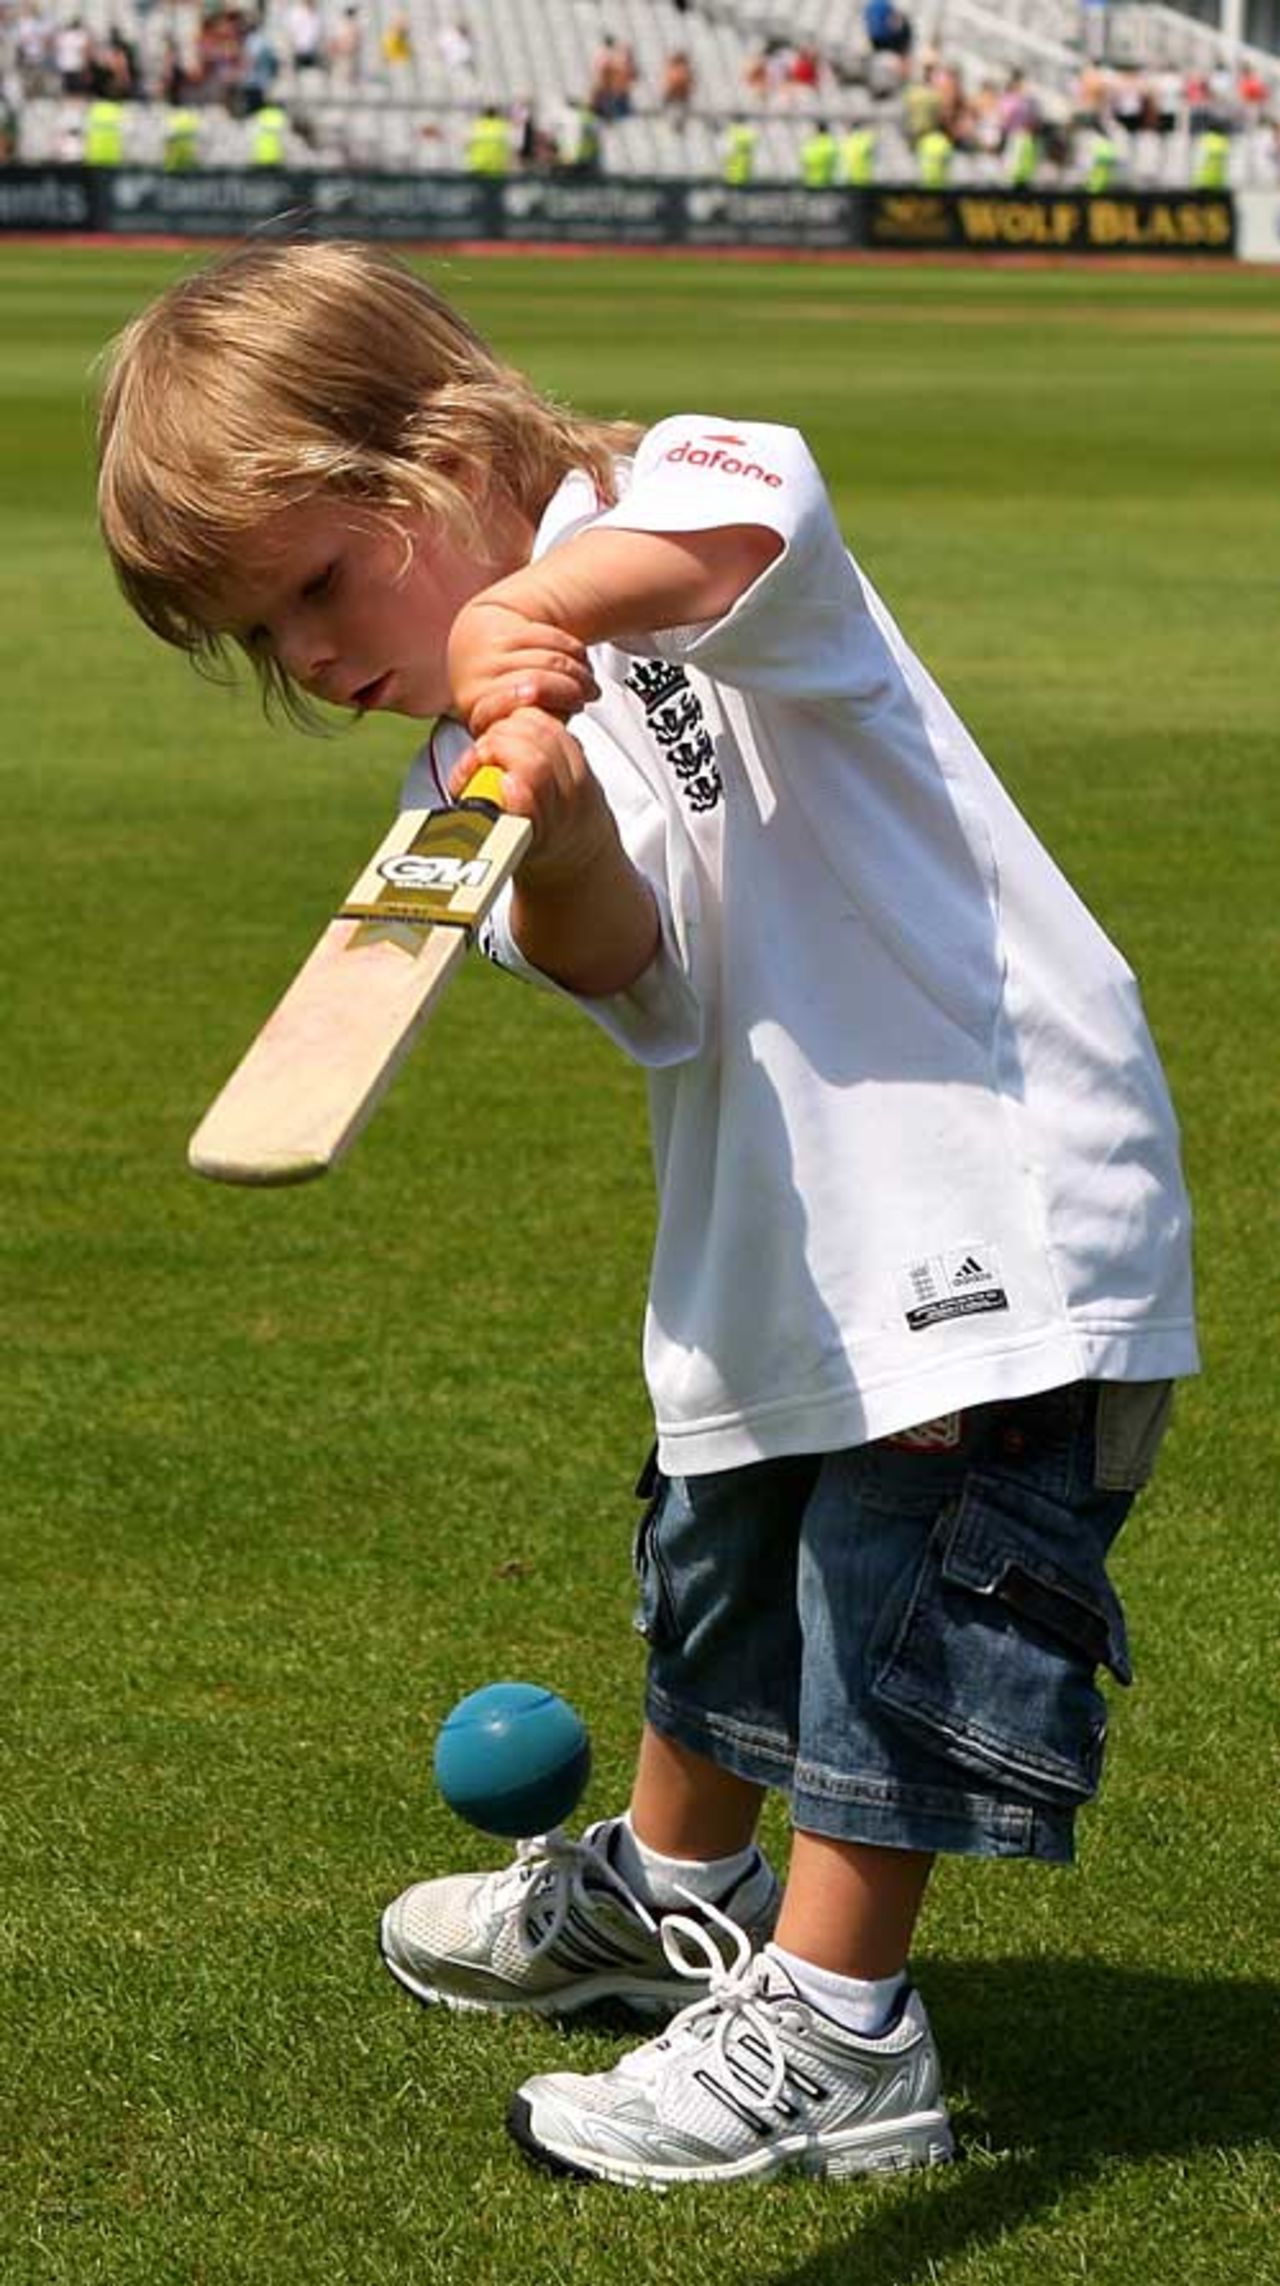 Like father, like son: Archie Vaughan practices his cover drive, England v New Zealand, 3rd Test, Trent Bridge, June 8, 2008